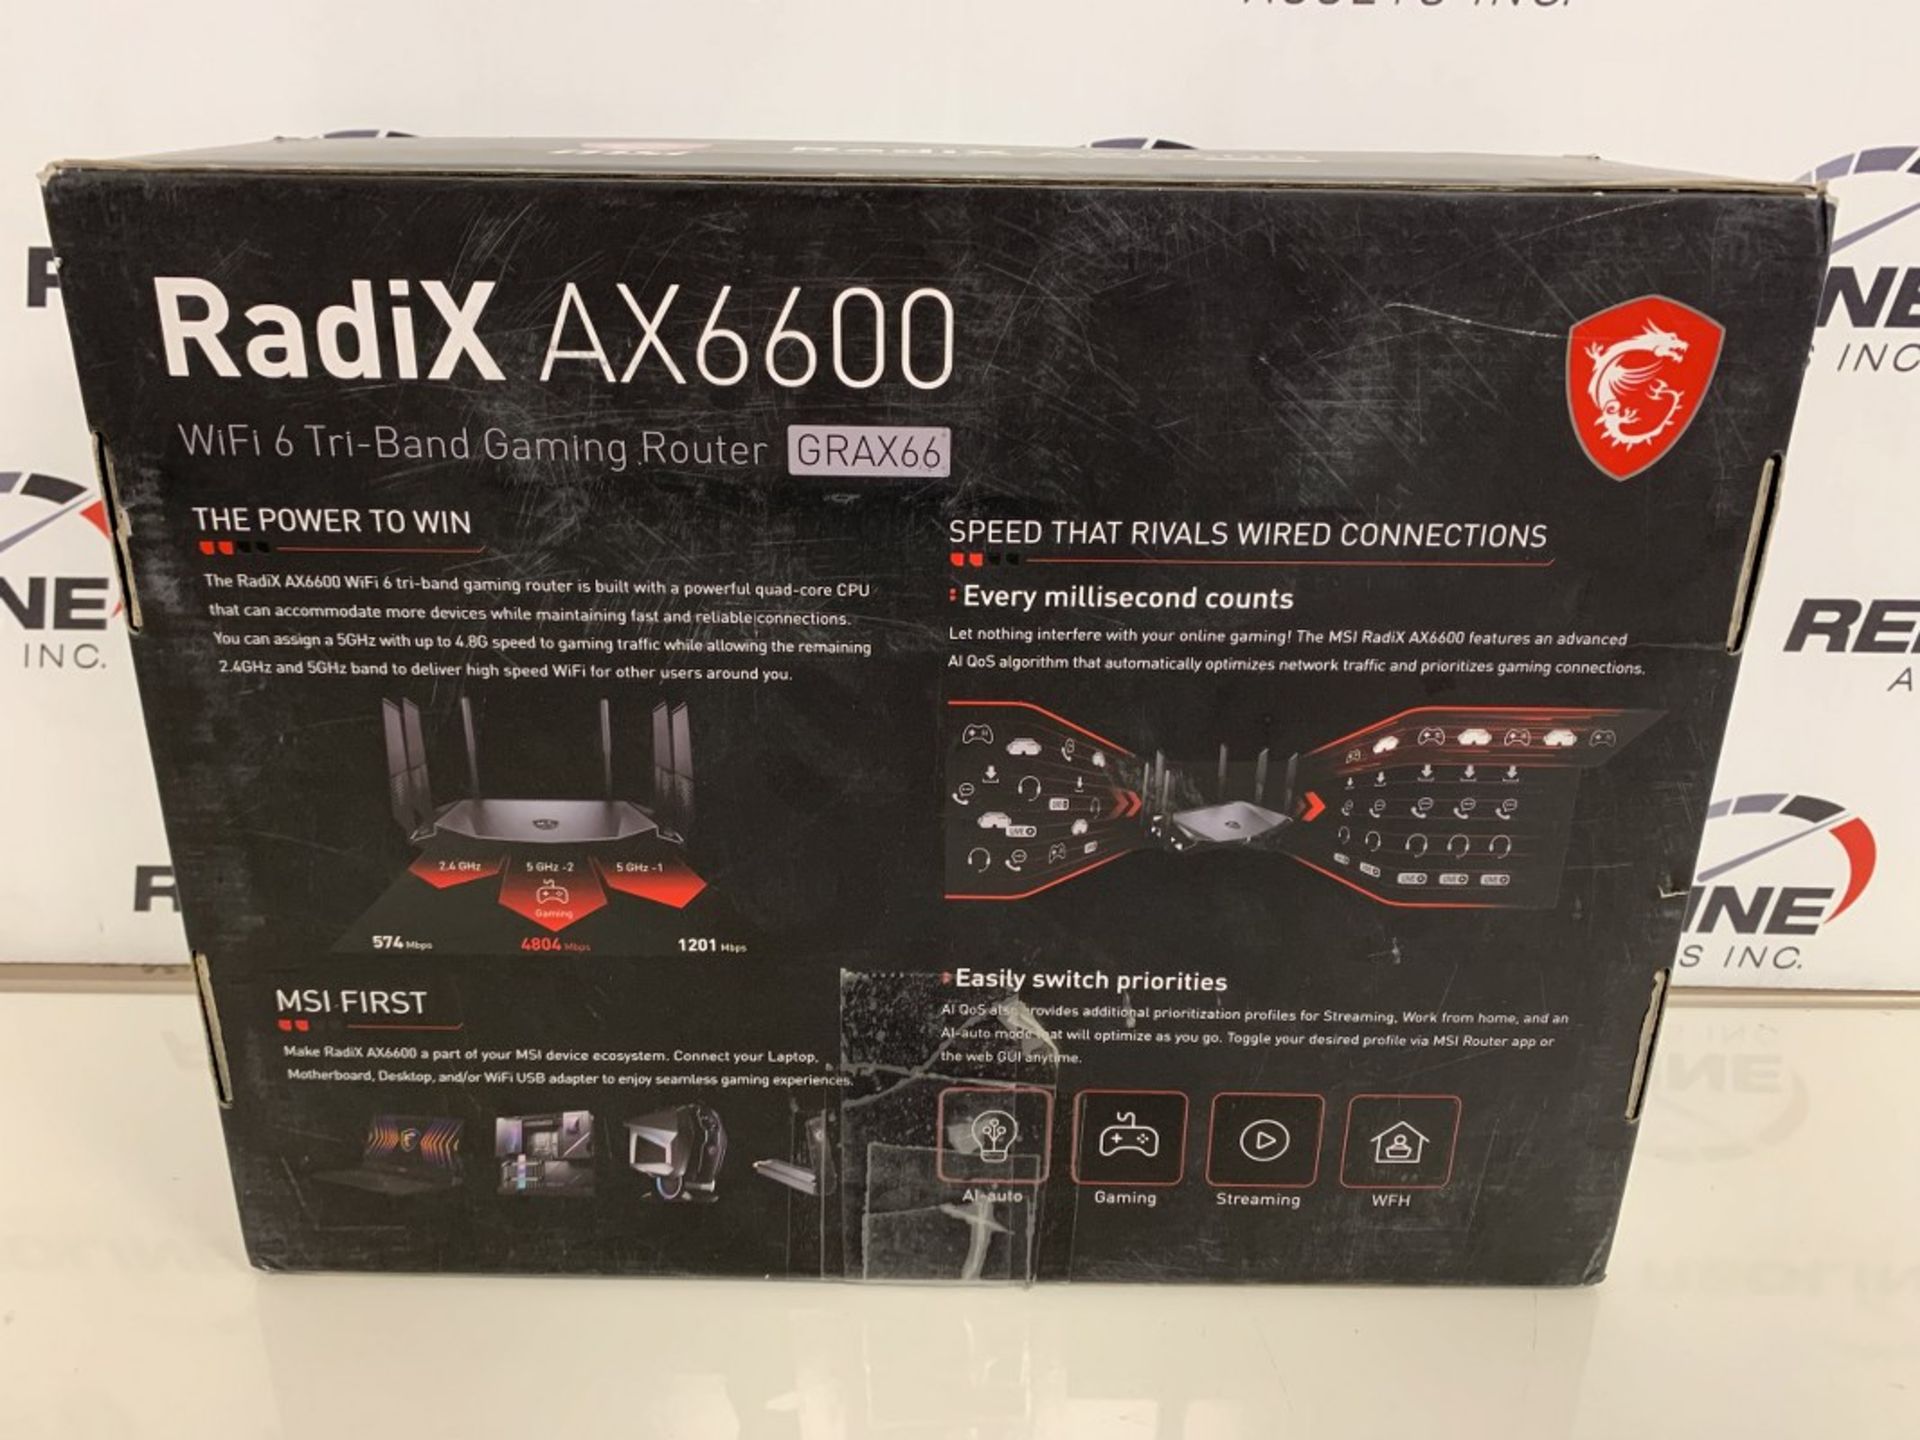 Msi - Radix Ax6600 - Wifi 6 Tri-Band Gaming Router - Image 2 of 2